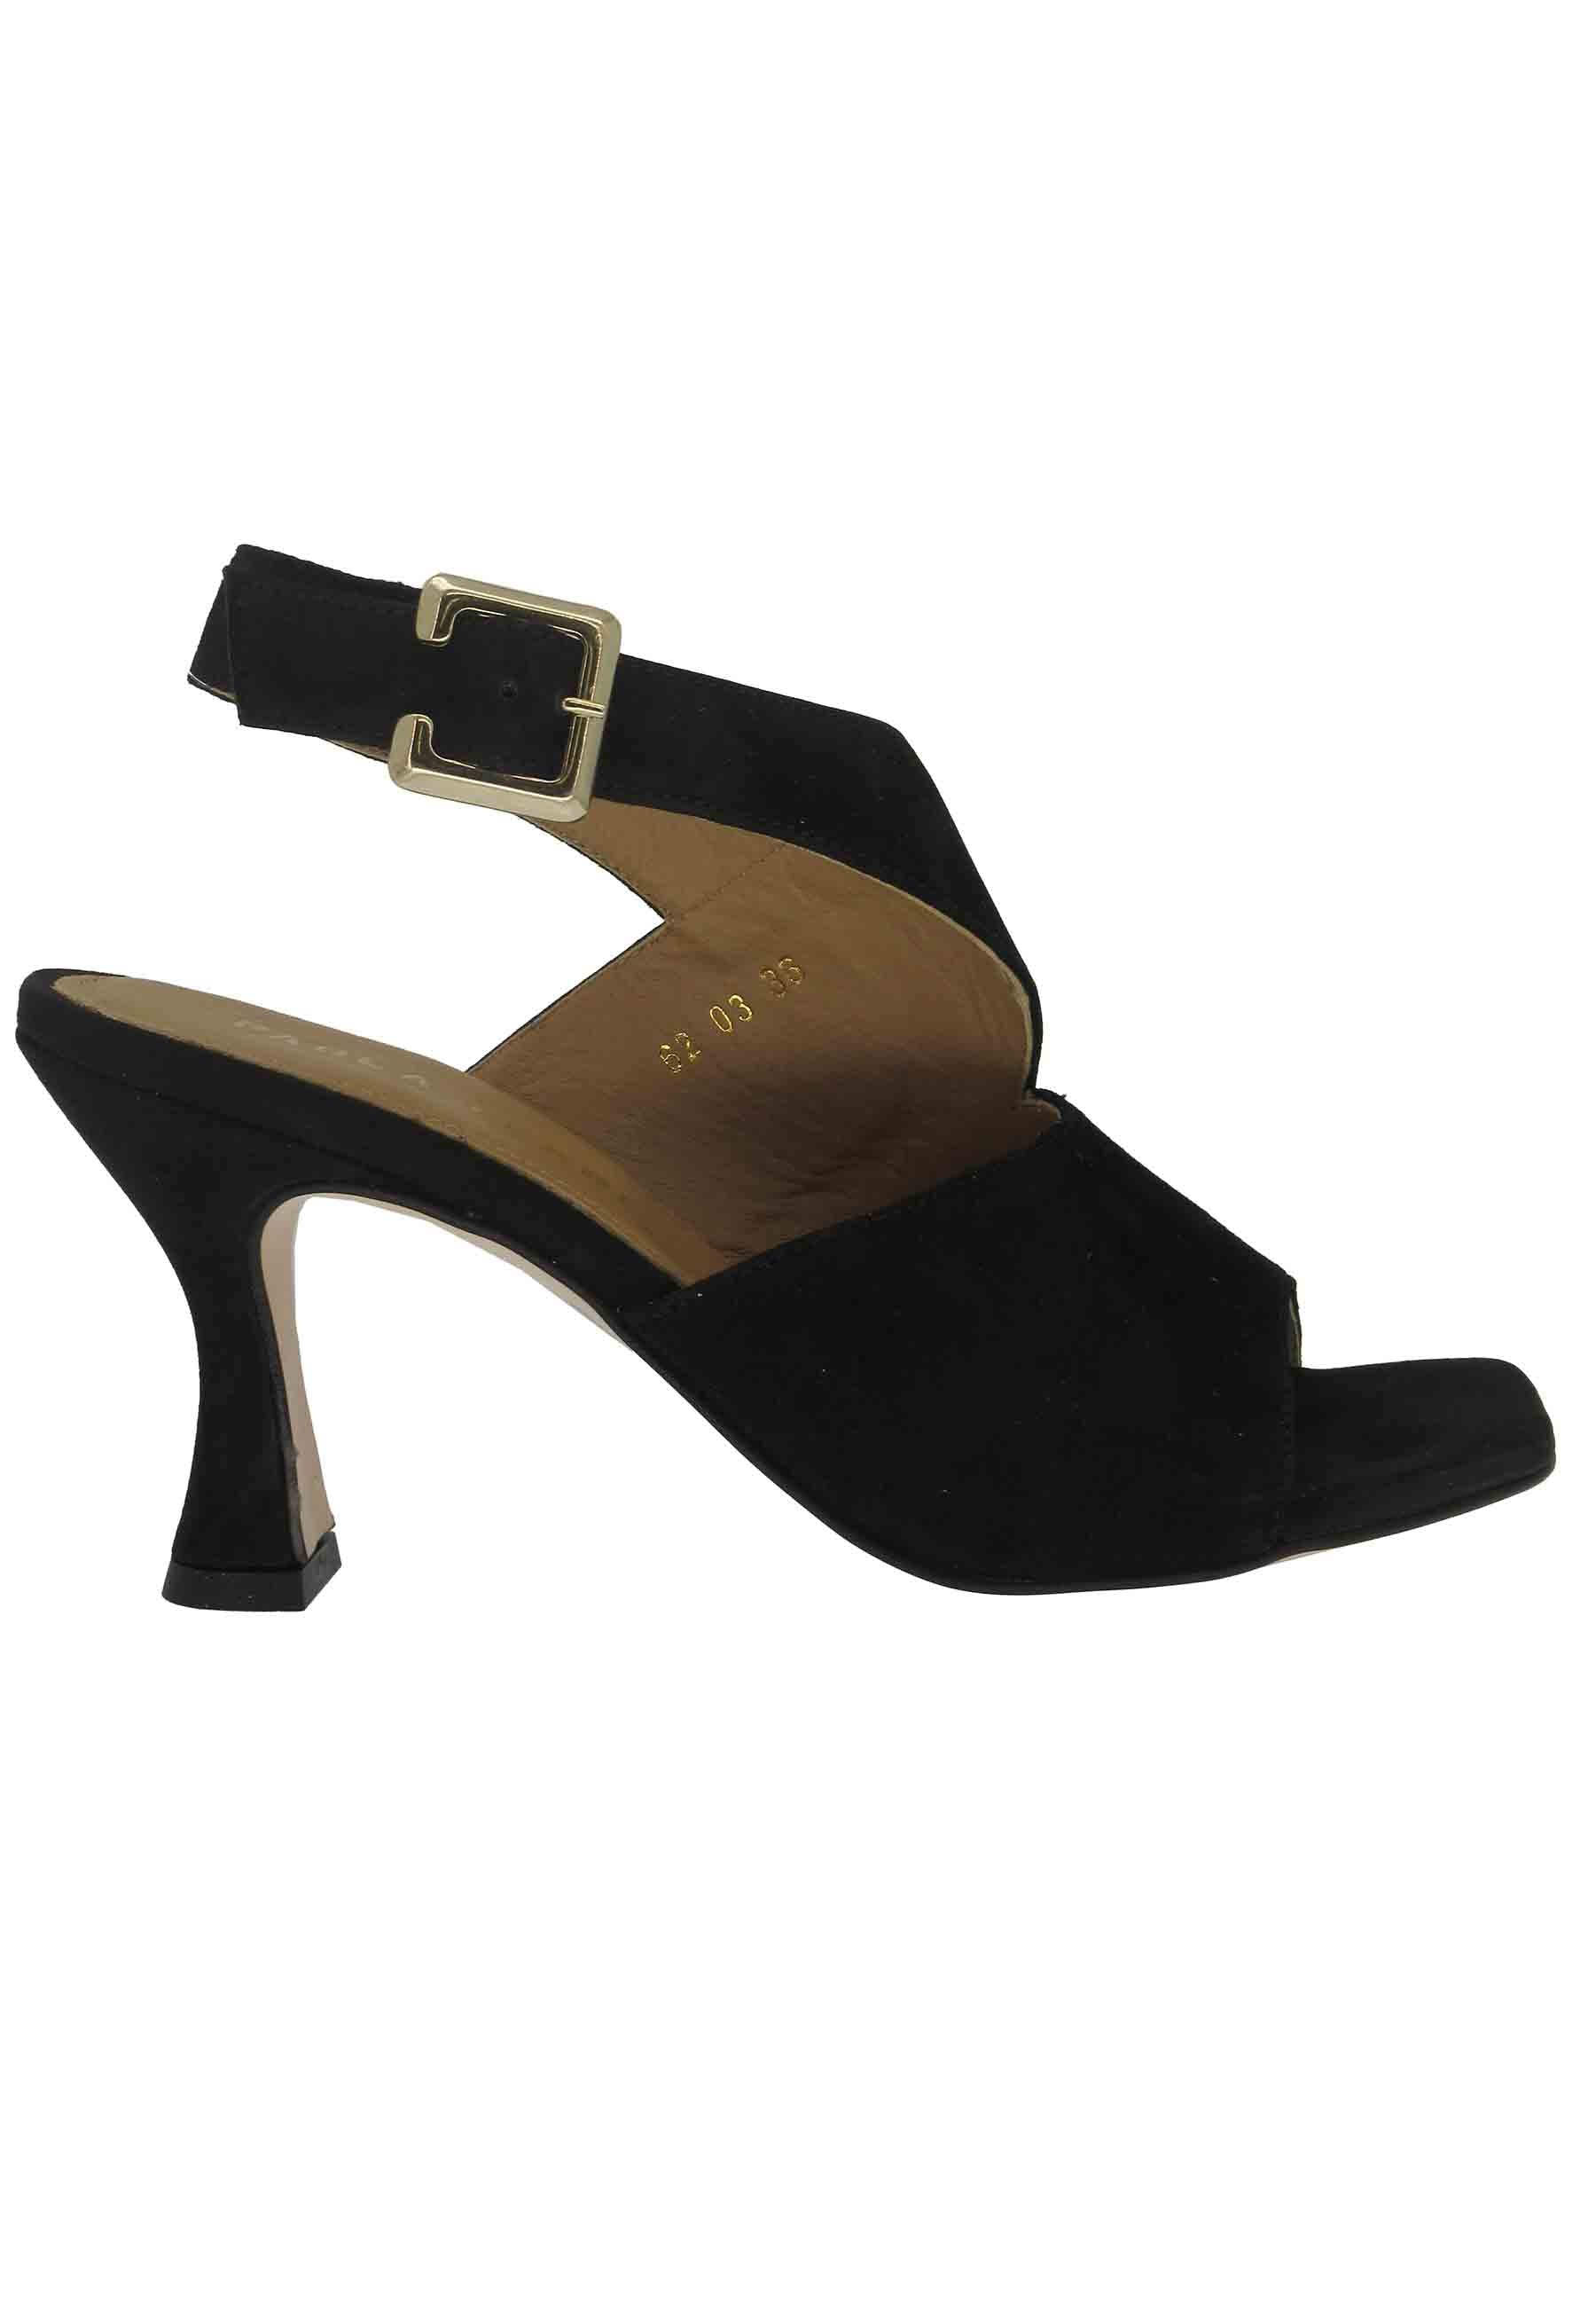 Women's black suede sandals with side buckle and high heel